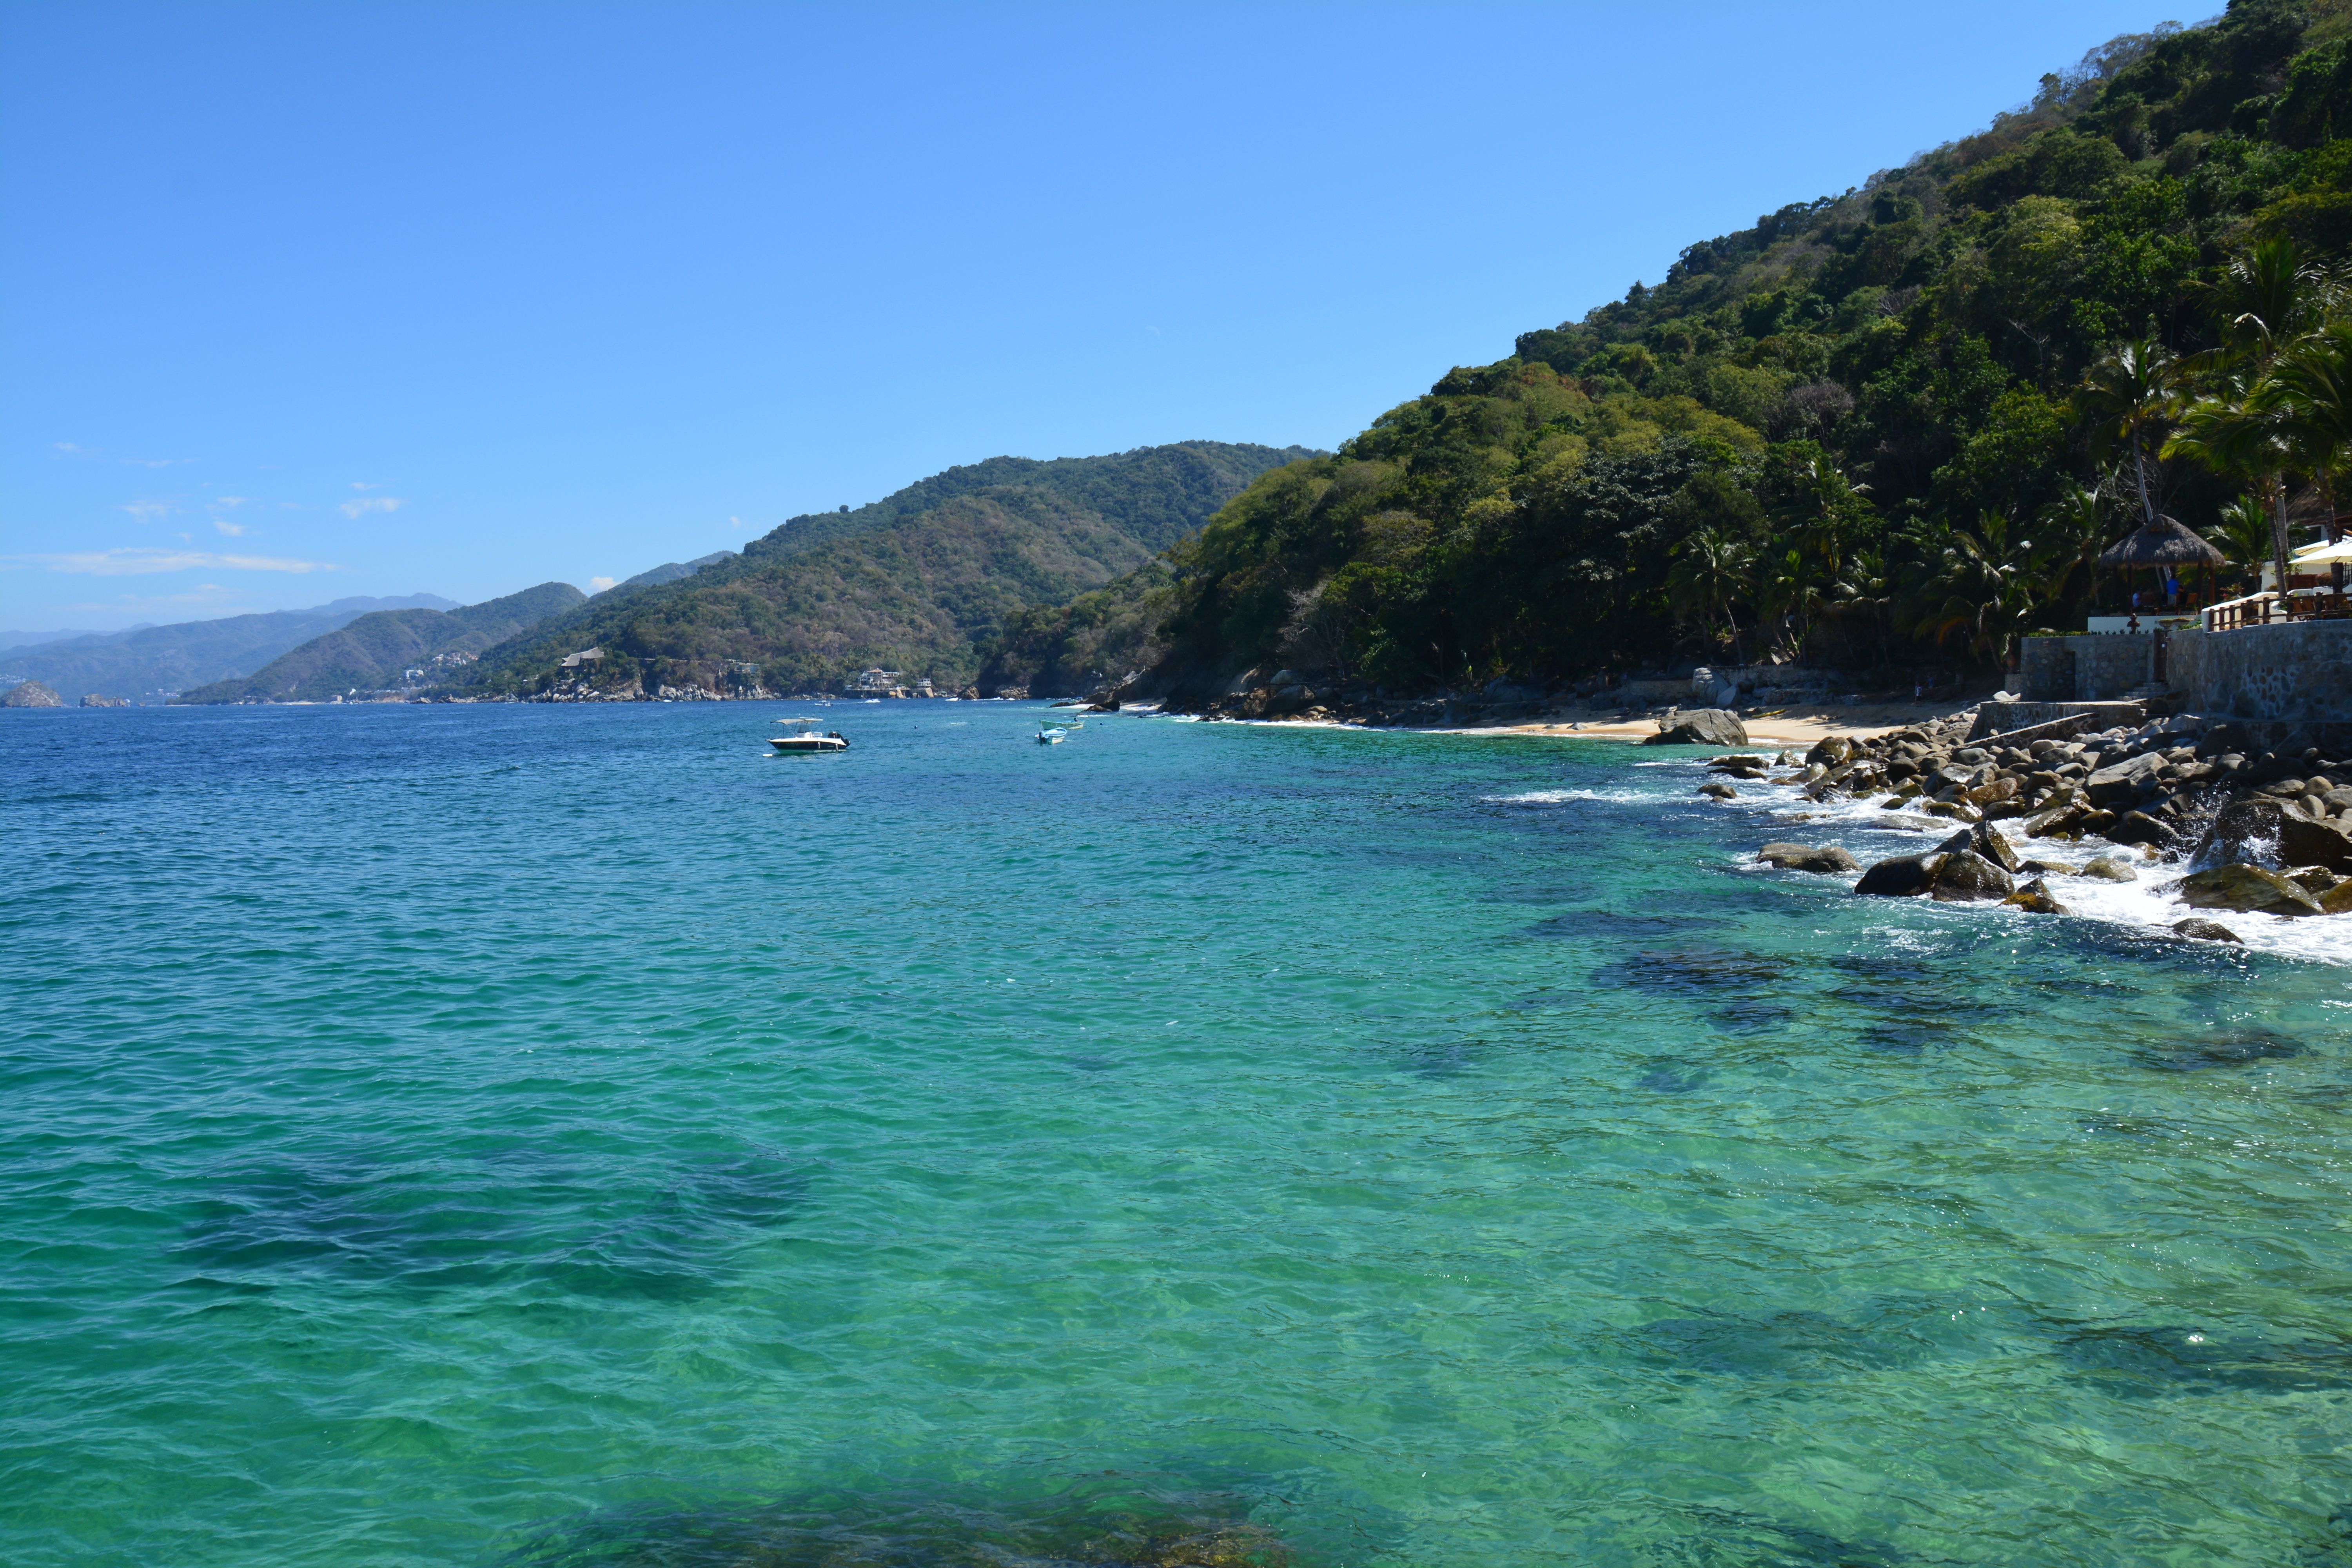 View of Mexican shore line with lush green hills and clear turquoise waters at Puerto Vallarta.